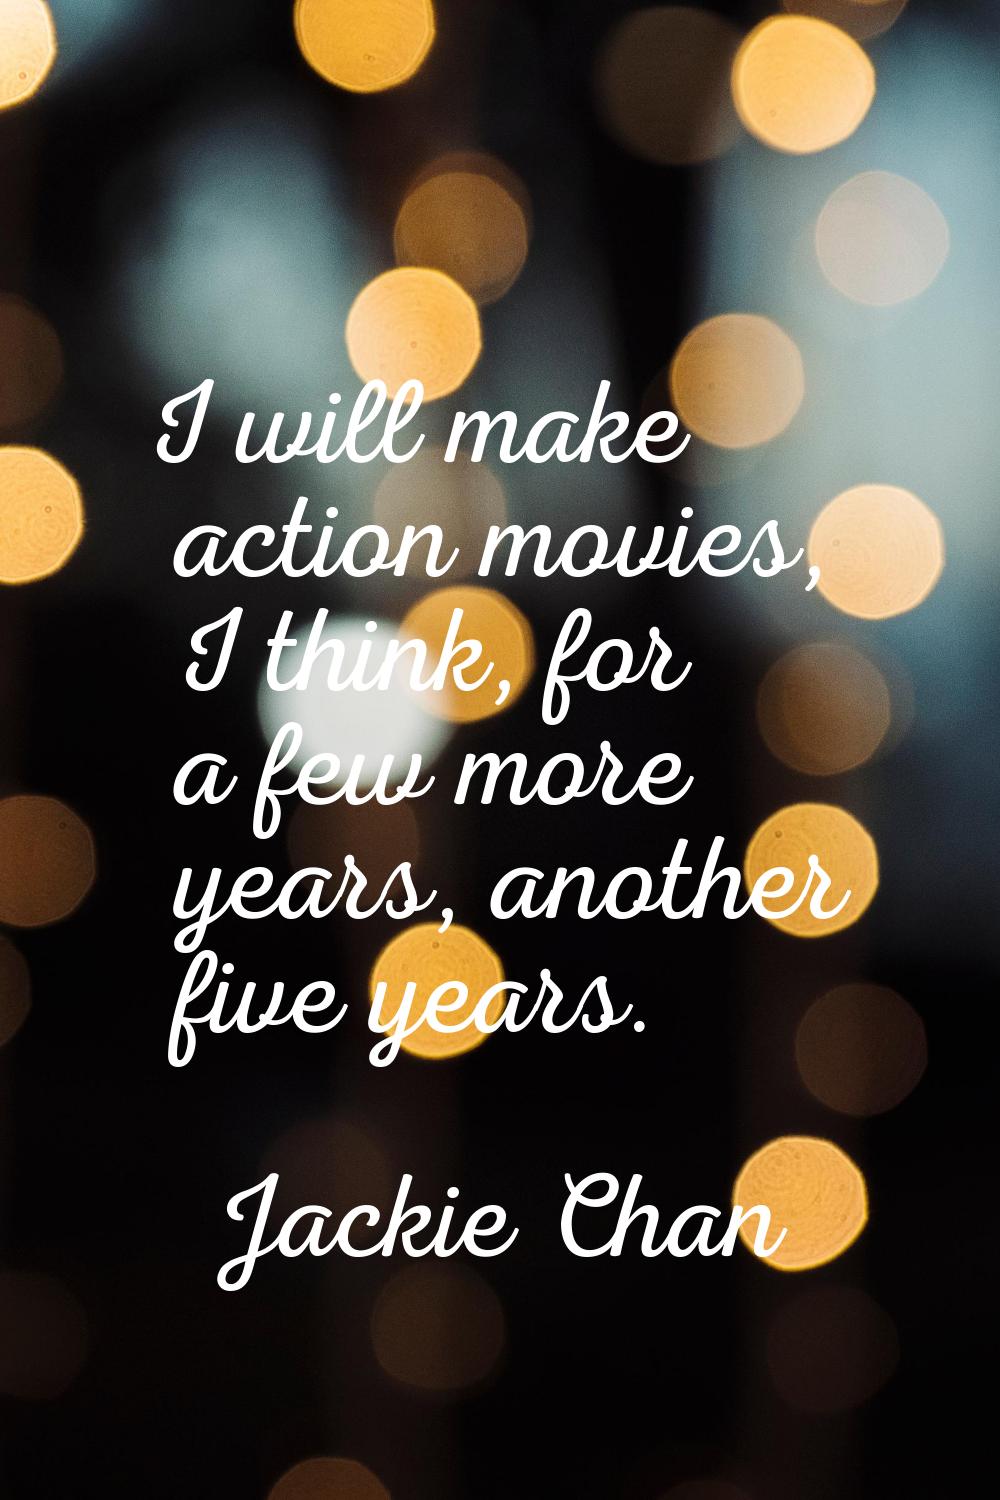 I will make action movies, I think, for a few more years, another five years.